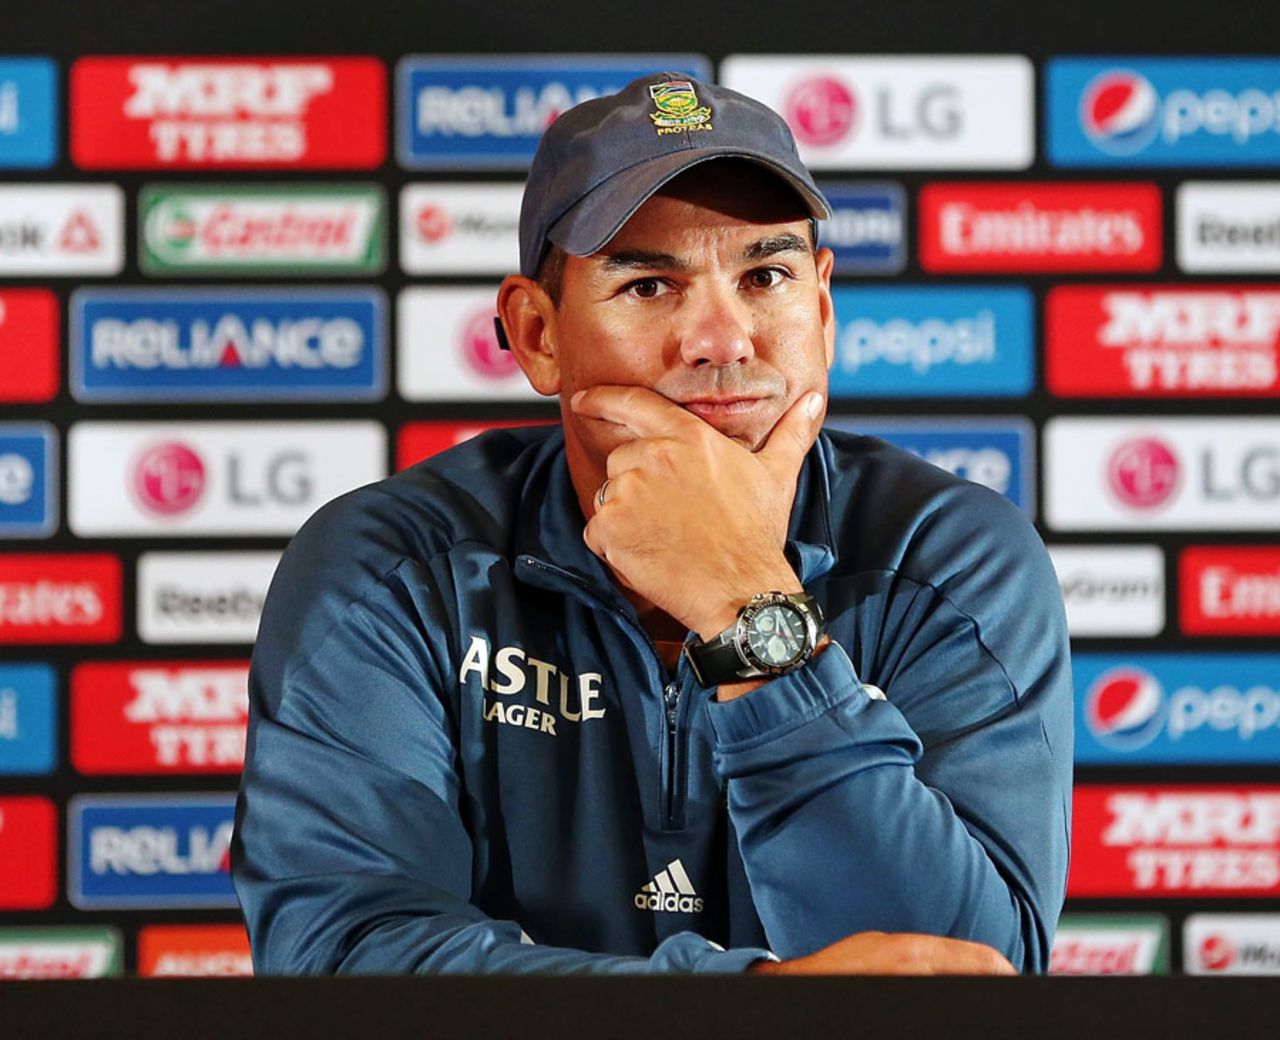 Russell Domingo at the post-match press conference, New Zealand v South Africa, World Cup 2015, 1st Semi-Final, Auckland, March 24, 2015